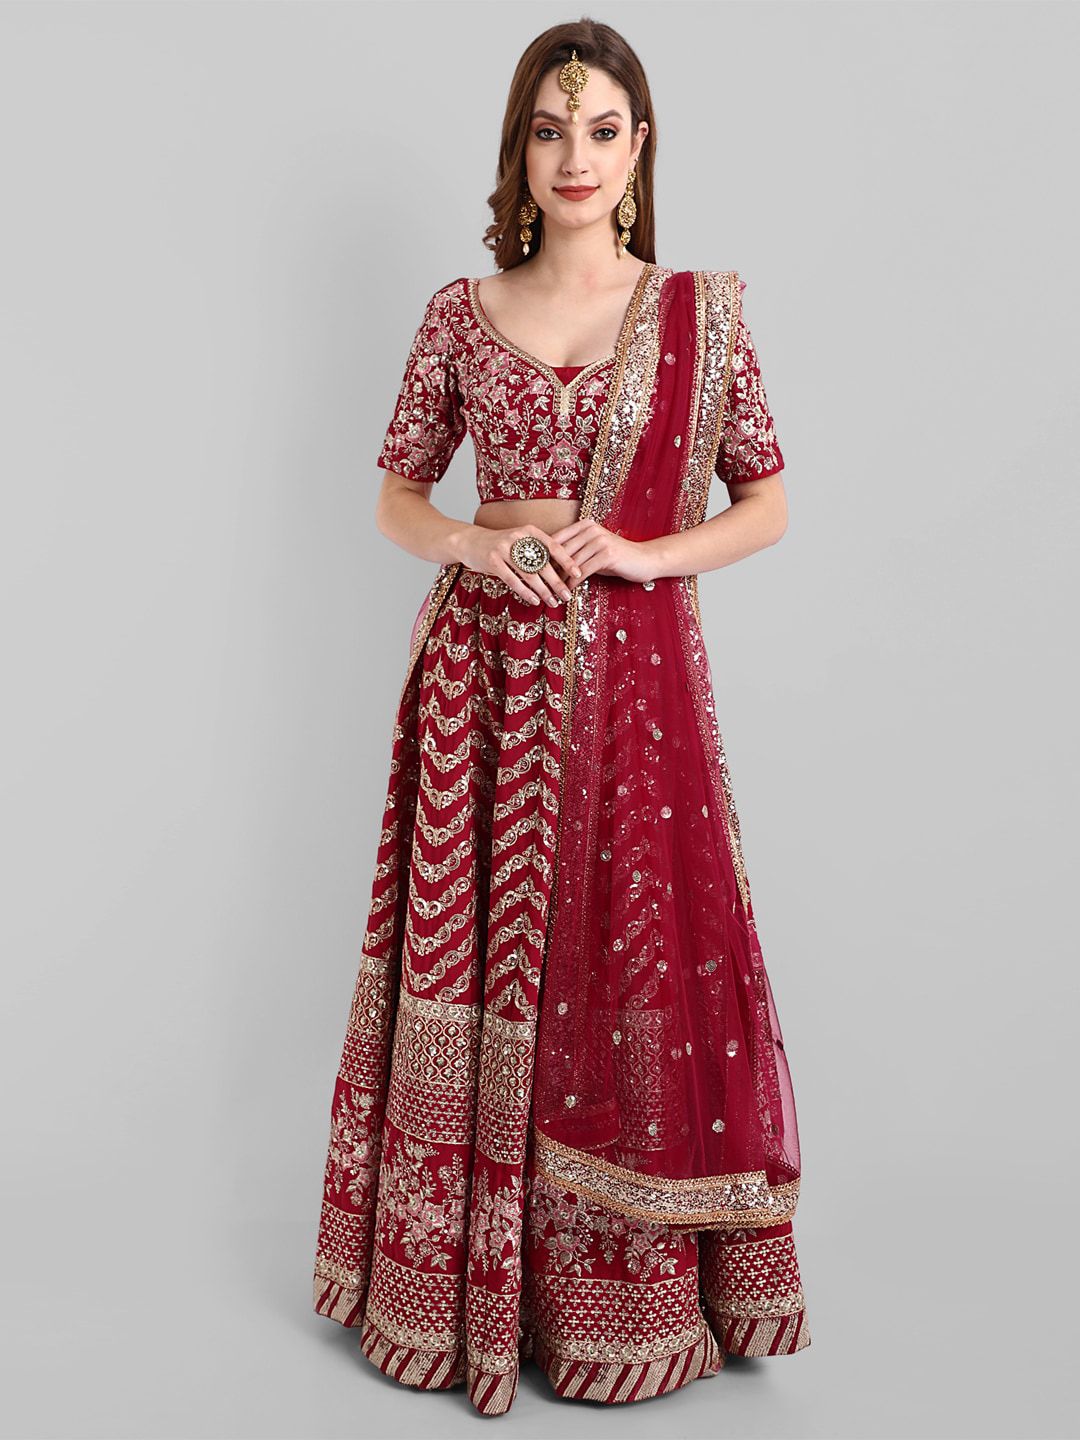 TIKODI Red & Gold-Toned Embroidered Sequinned Semi-Stitched Lehenga & Unstitched Blouse With Dupatta Price in India